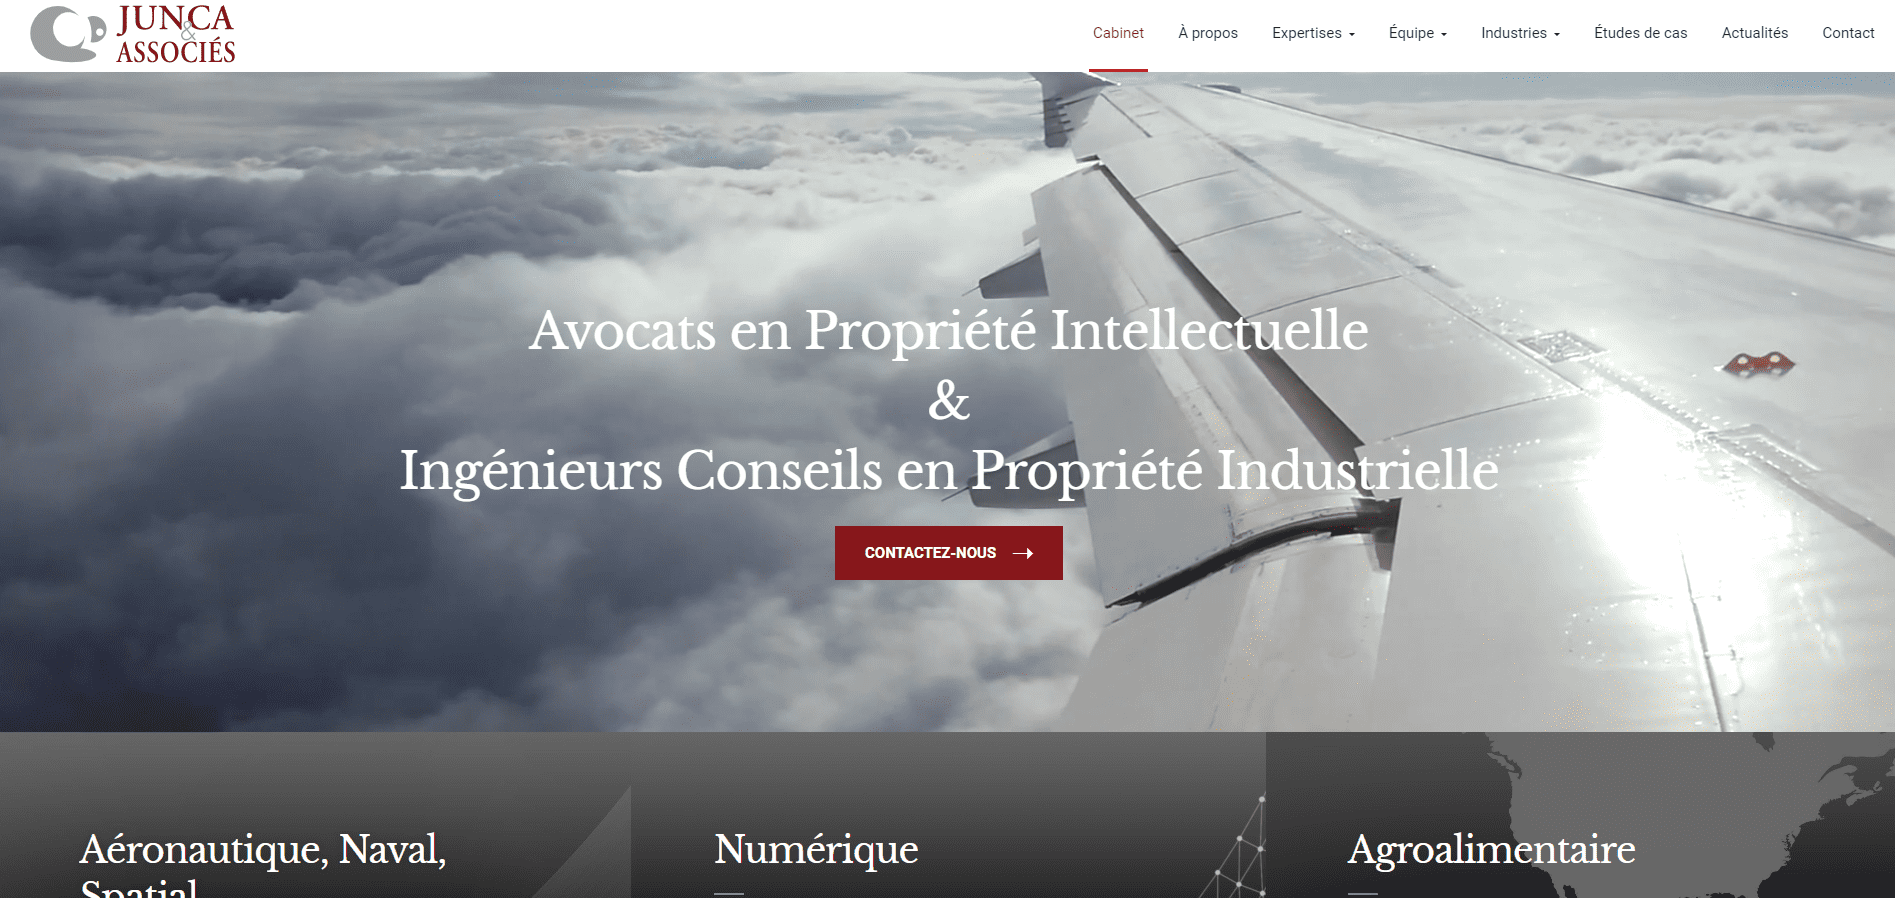 baccana-digital-consulting-projet-cabinet-junca-et-associes-toulouse